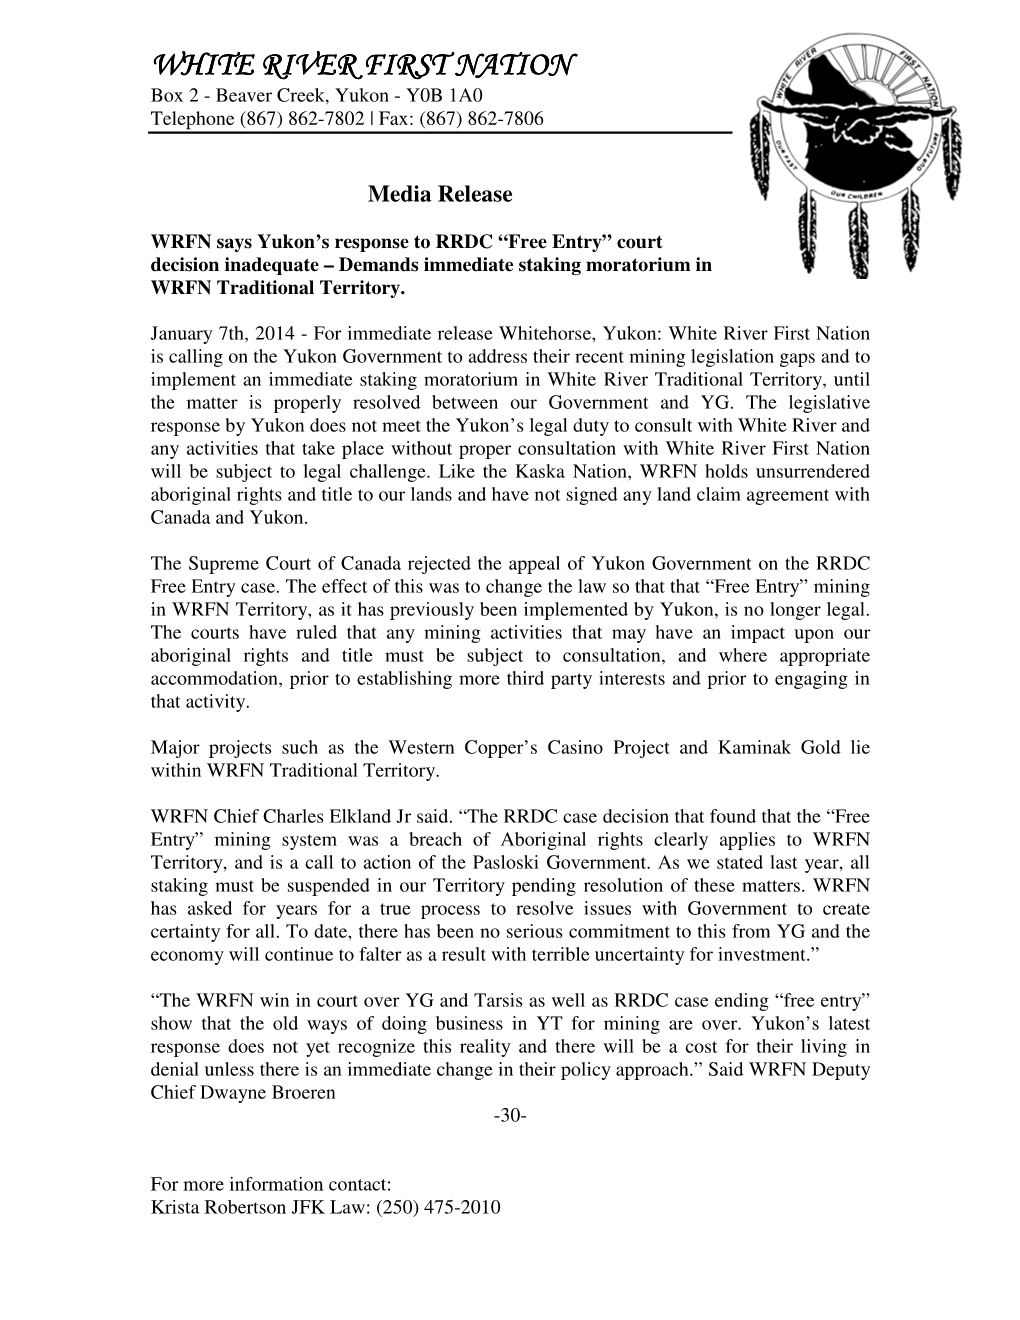 White River First Nation News Release